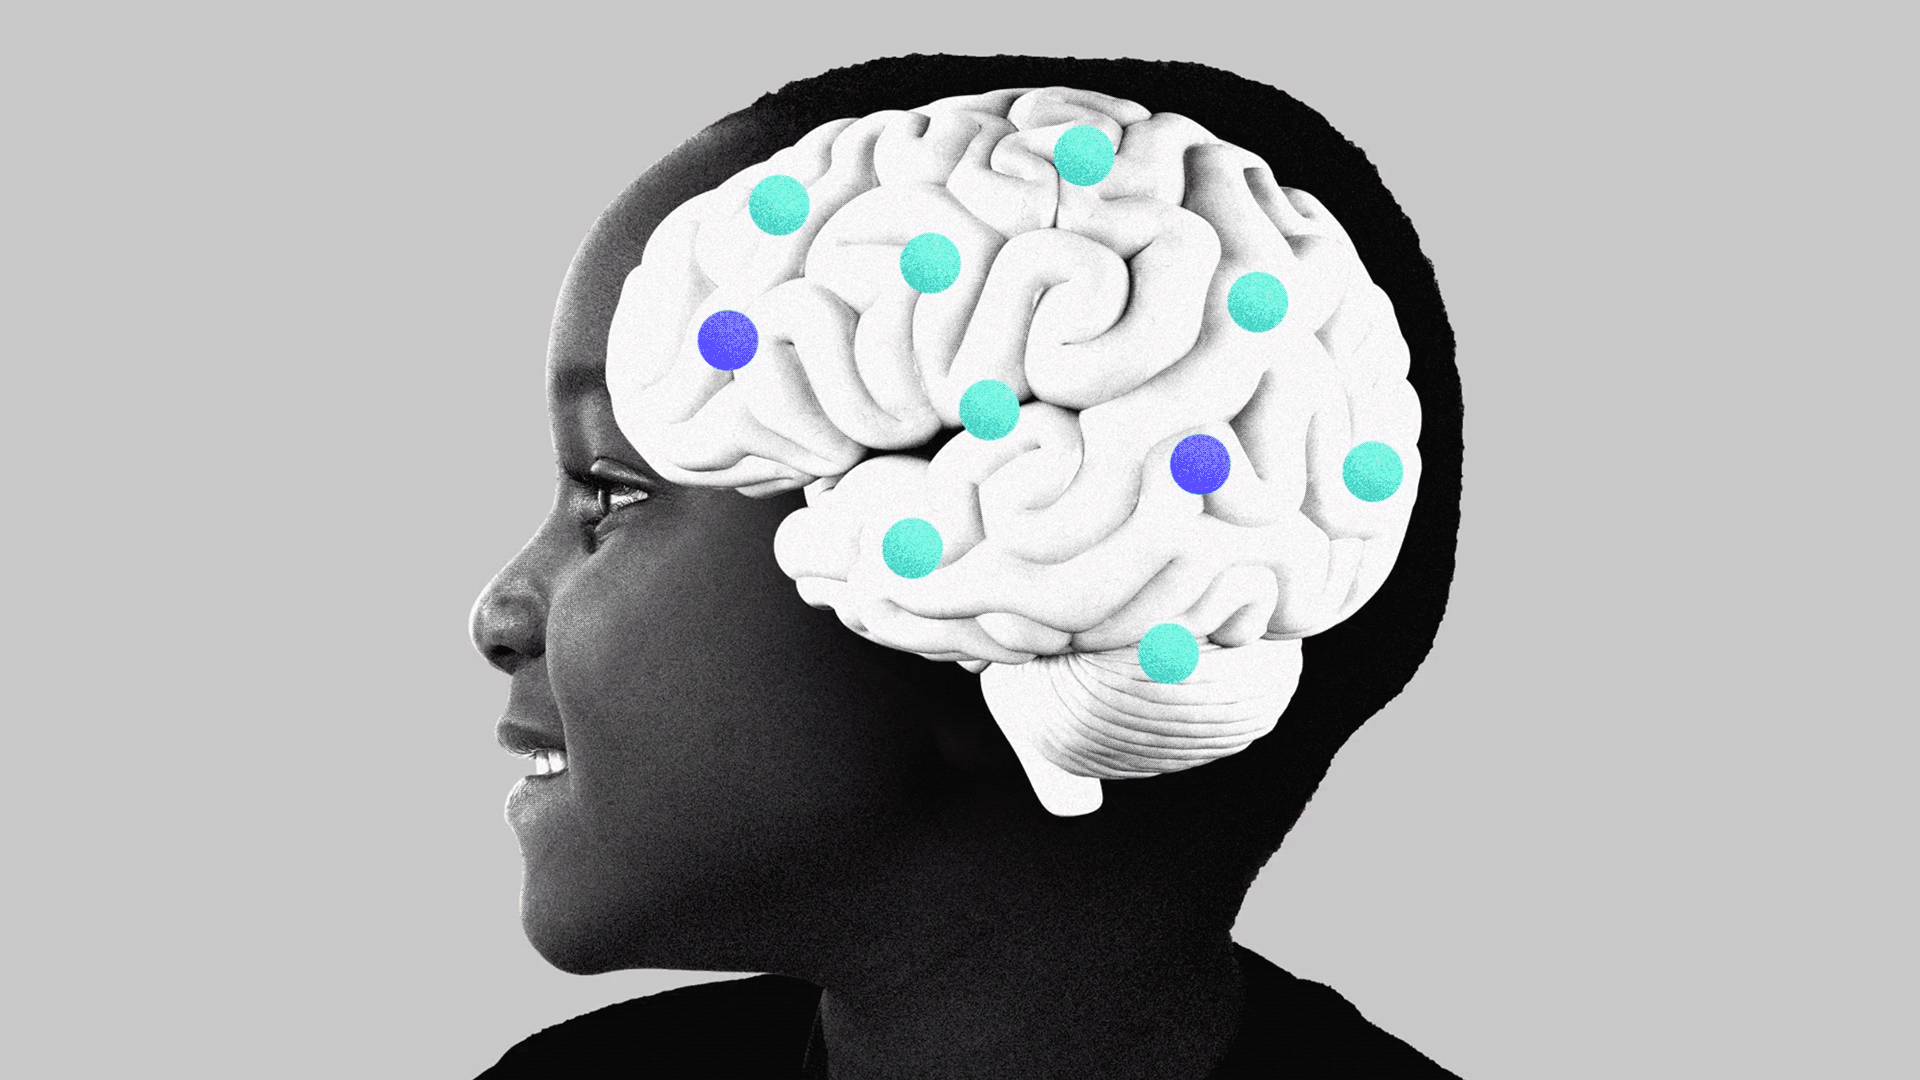 Illustration of a child's brain with animated dots